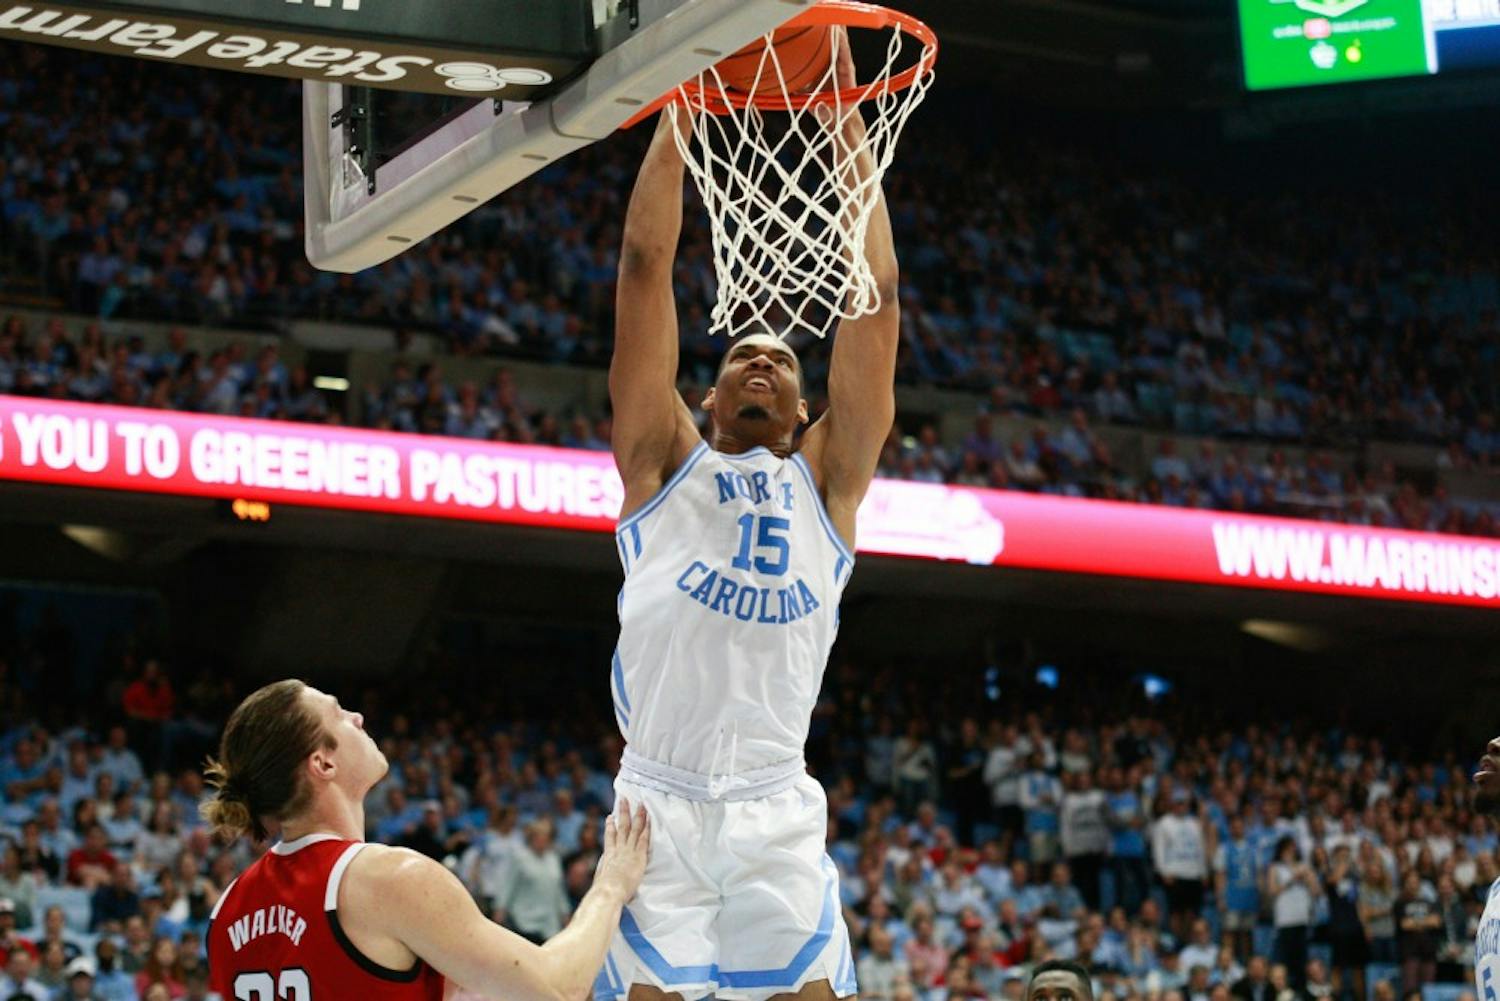 No. 8 UNC brings hustle, intensity on glass in coasting to 113-96 win over N.C. State